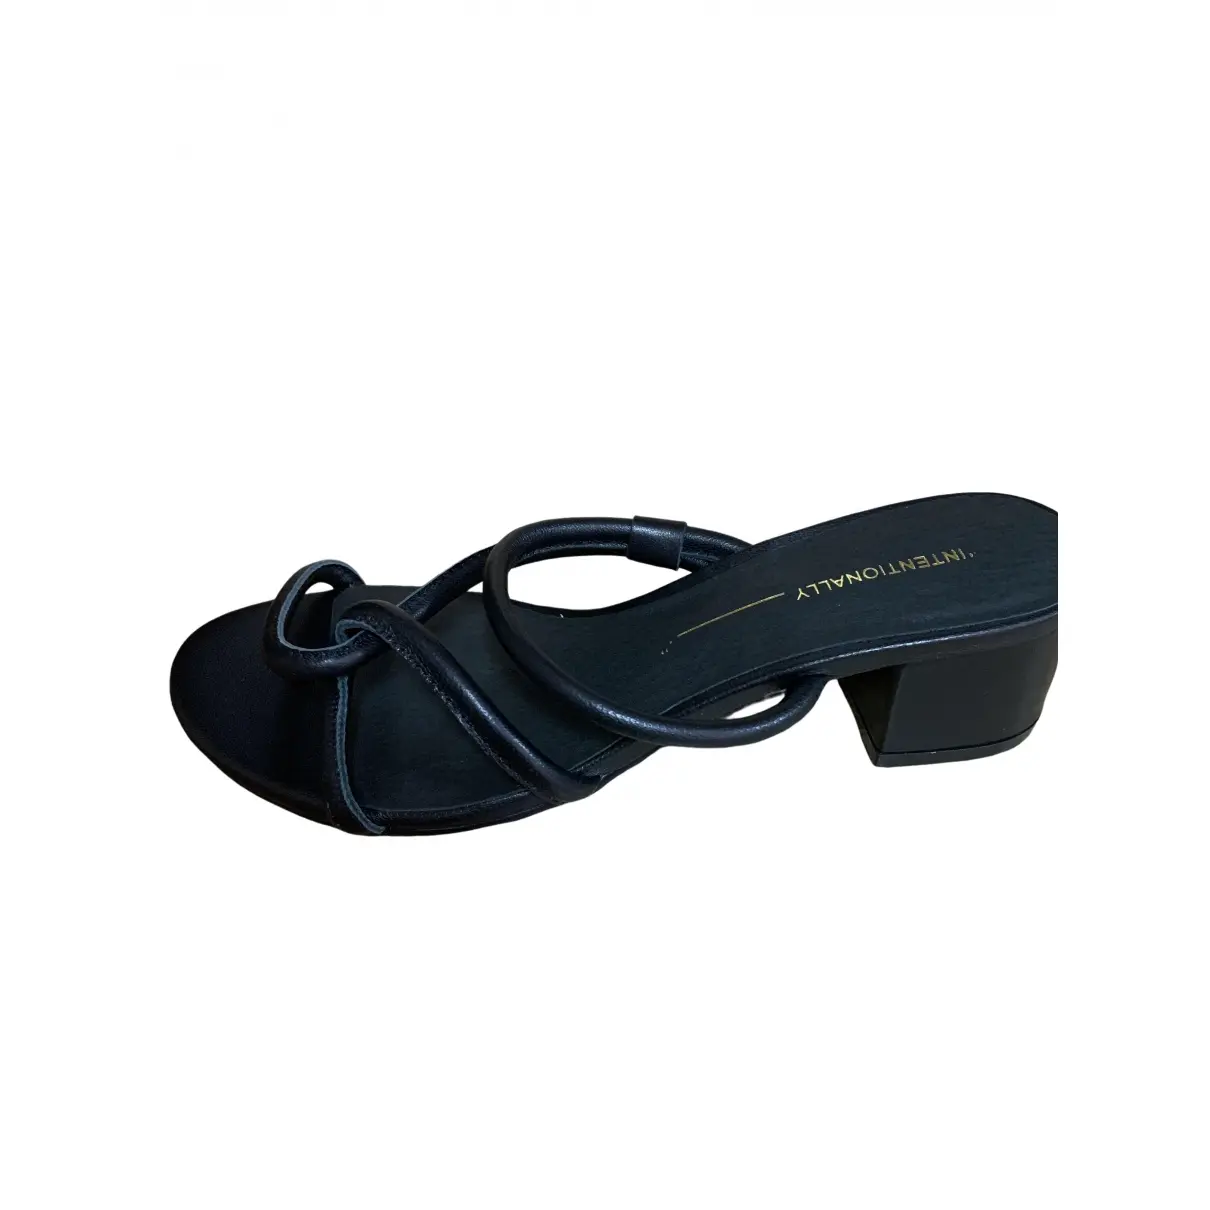 Leather sandal Intentionally Blank